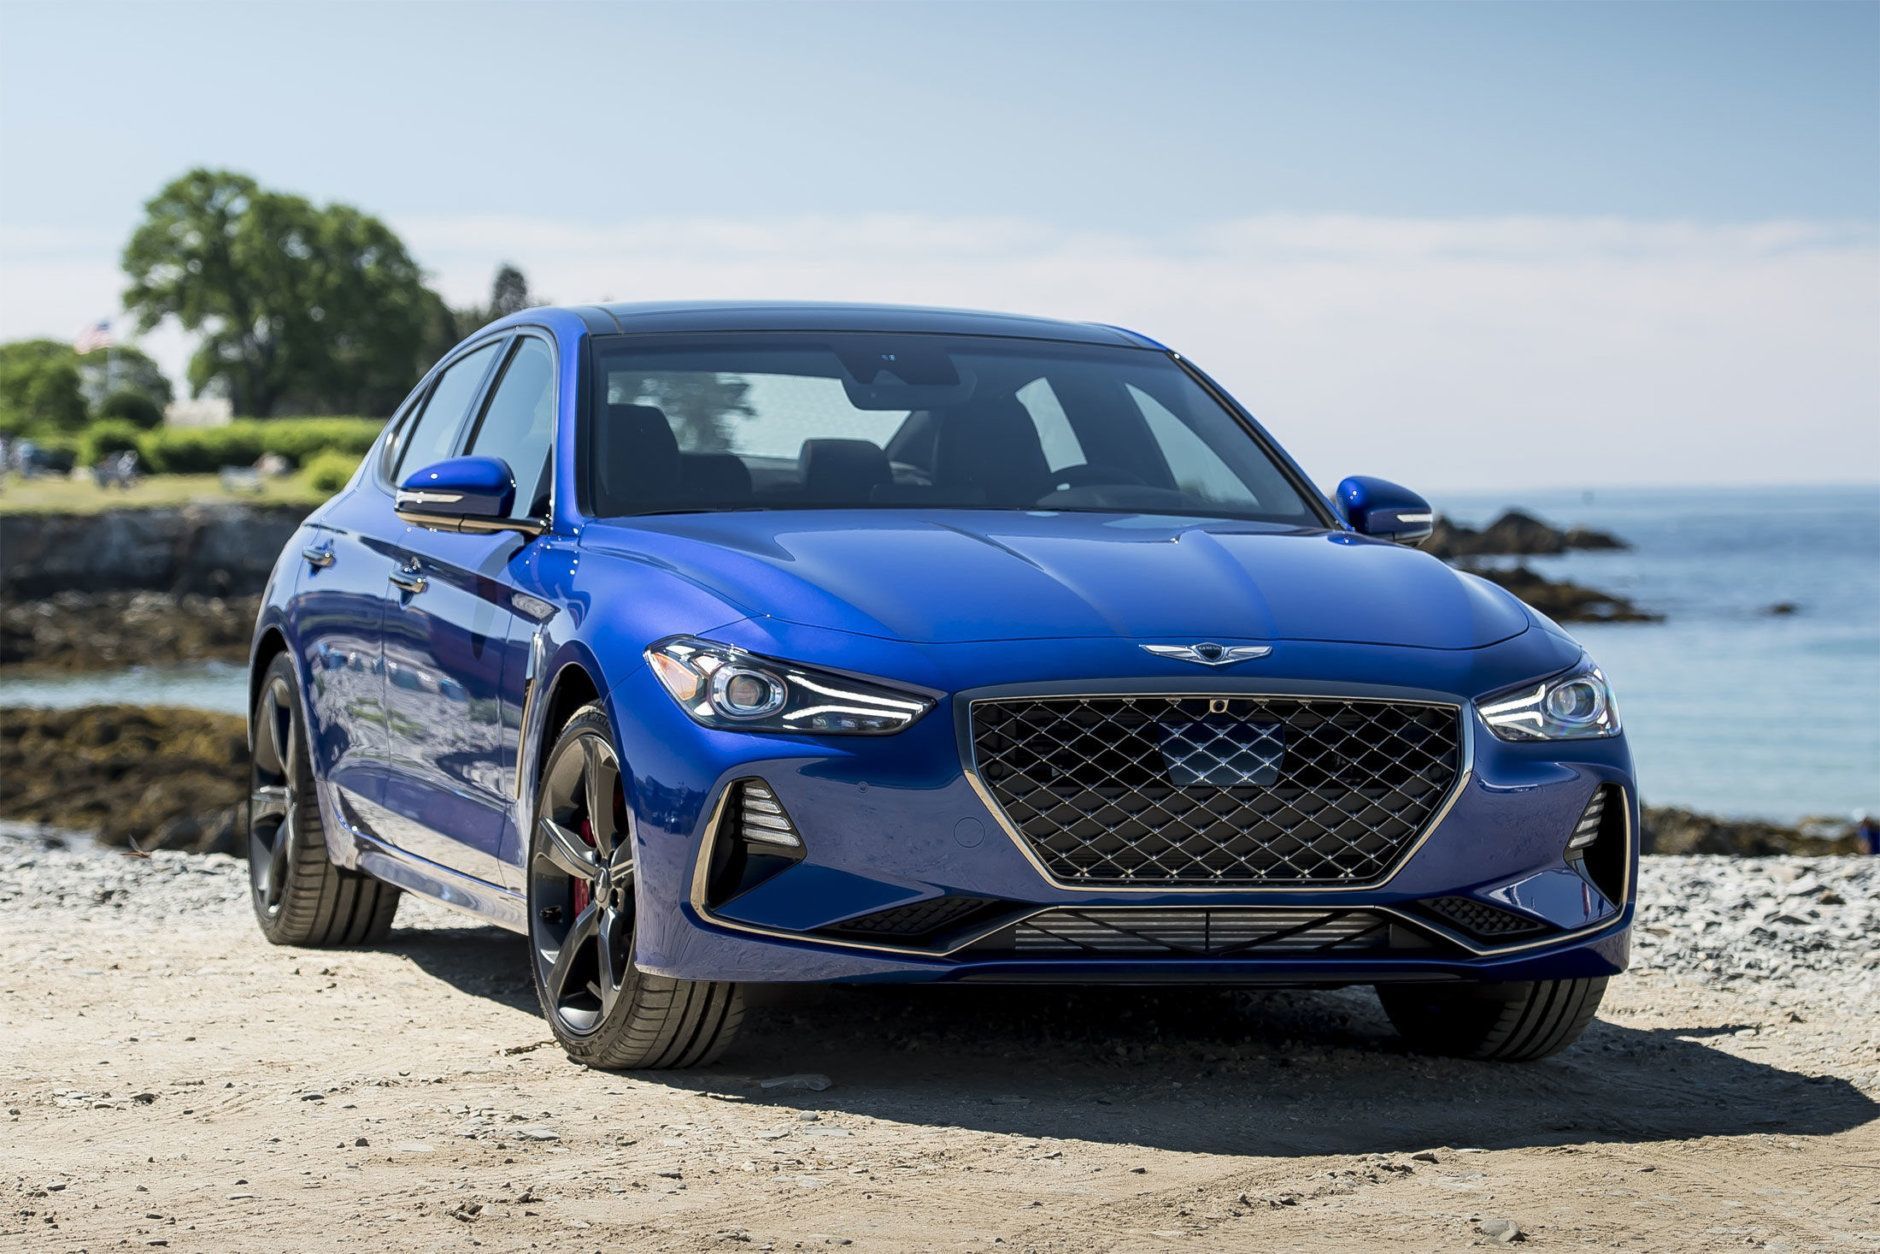 2019 Genesis G70
Lease Deal: $299 per month for 36 months with $3,400 due at signing (Courtesy Genesis Motor America)